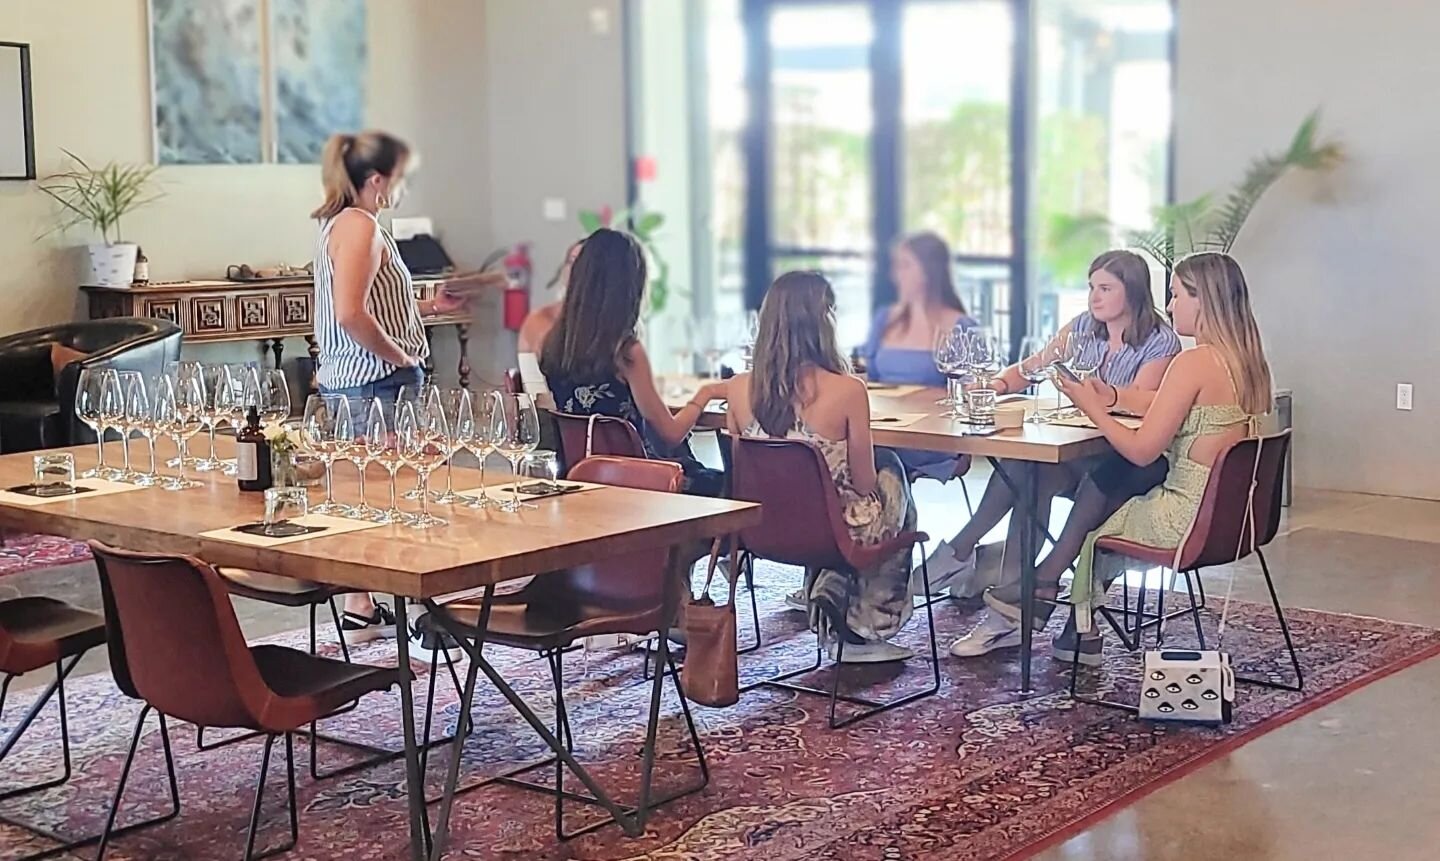 Nice and cool in here! 

#keepitcool #nohotwine #wine #winetasting #Napa #visitnapavalley #boutiquewinery #girltrip #yum #cheers #travel #ac